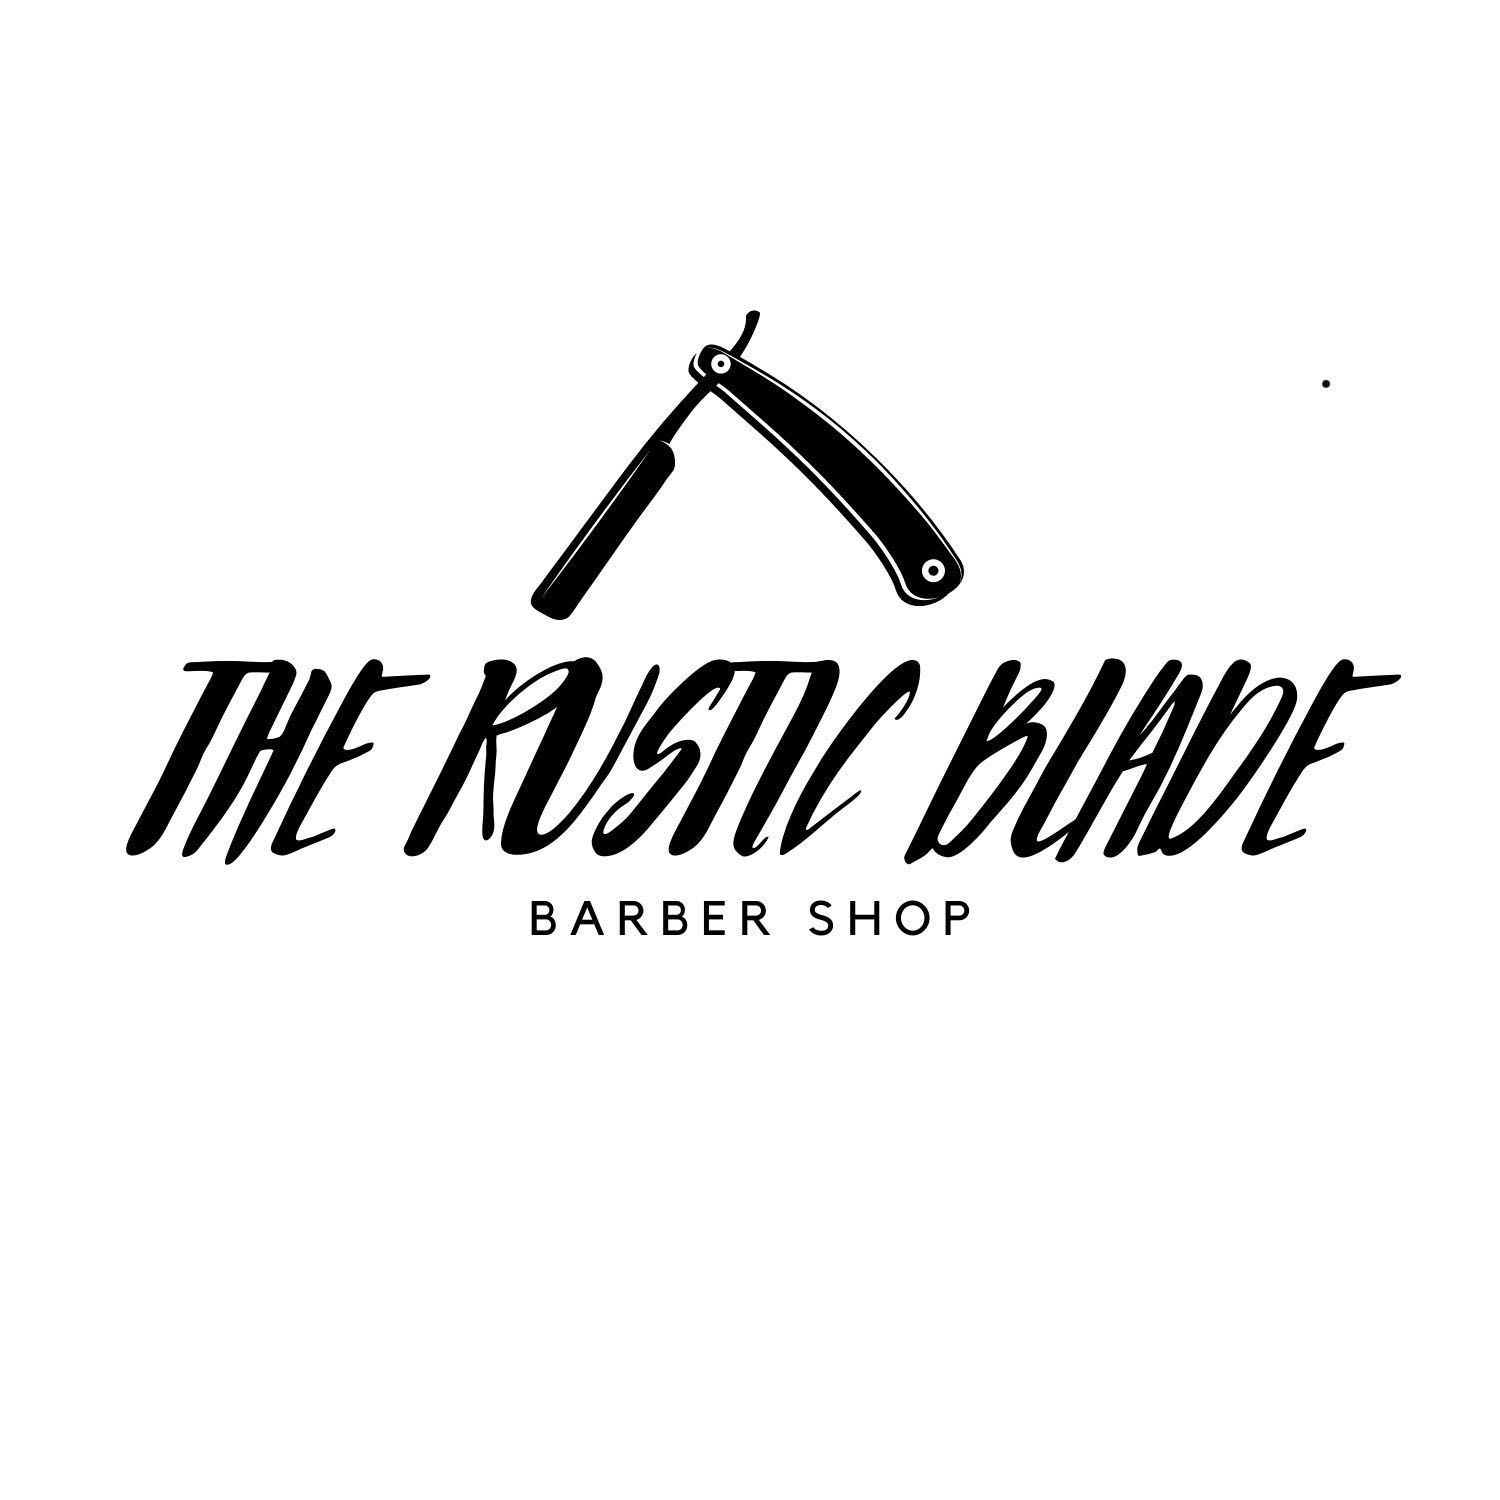 The Rustic Blade, 324 N. Circle Dr, Sealy, 77474